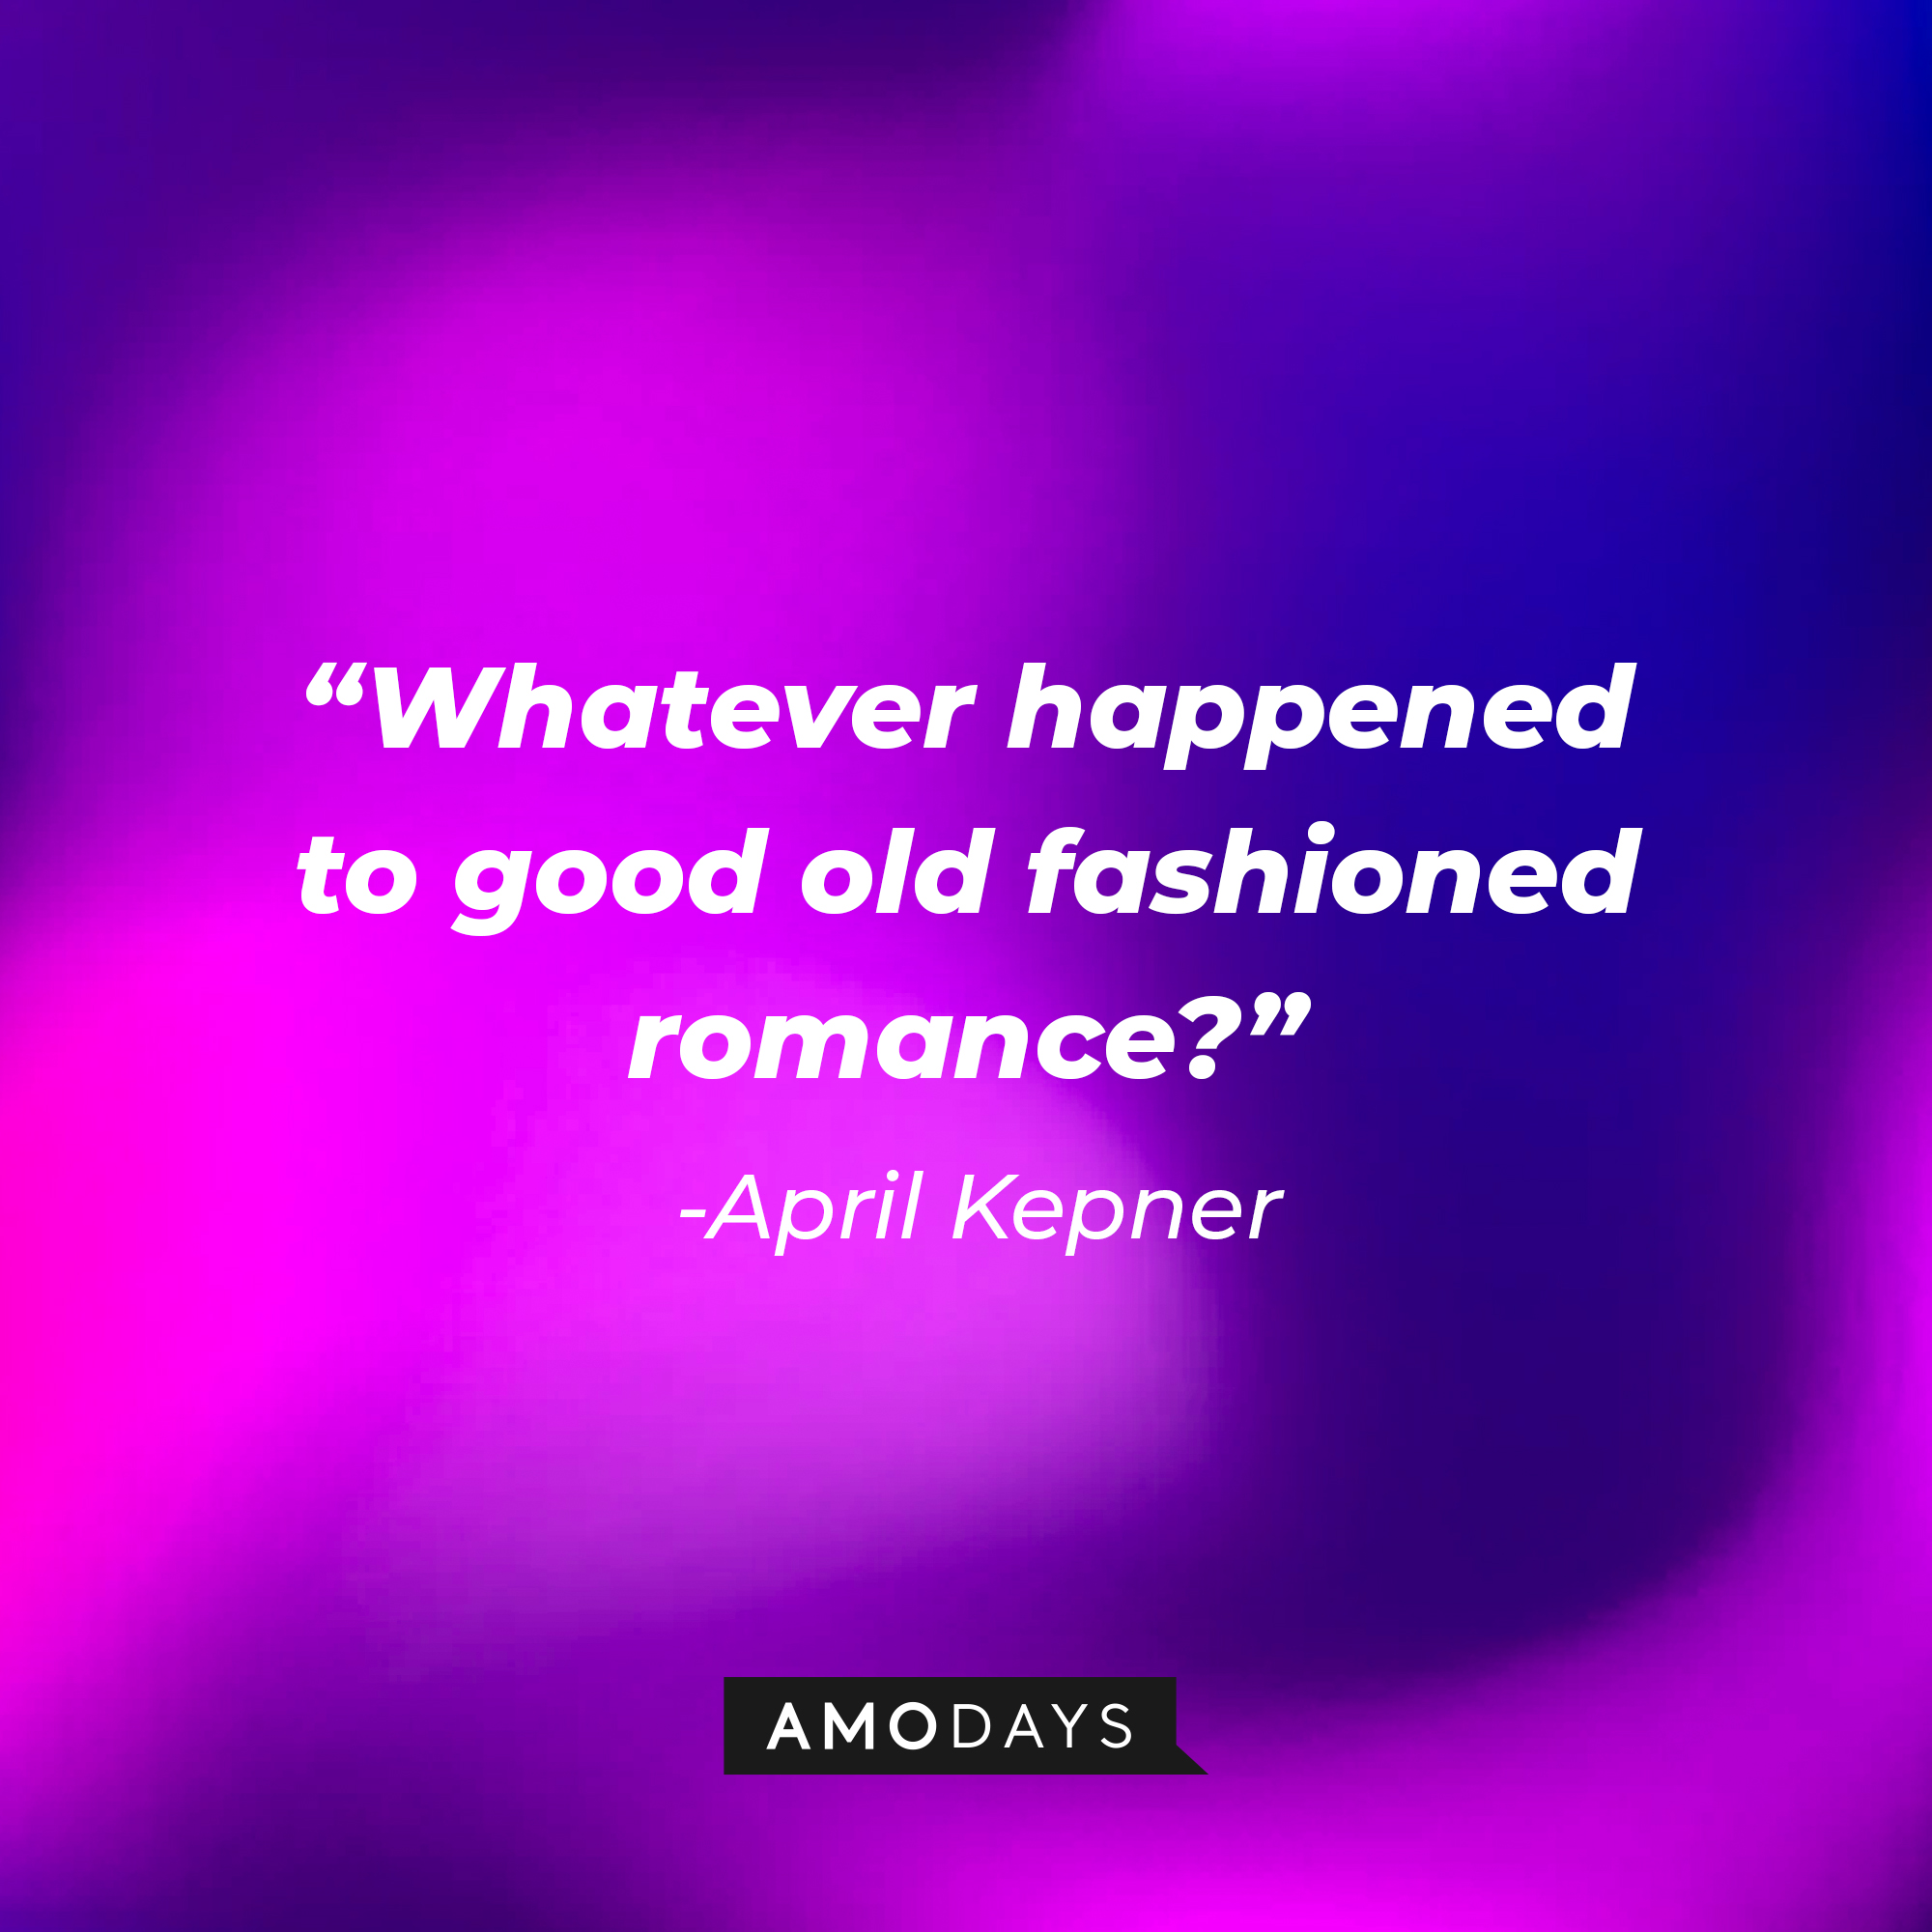 April Kepner's quote: "Whatever happened to good old fashioned romance?" | Source: AmoDays